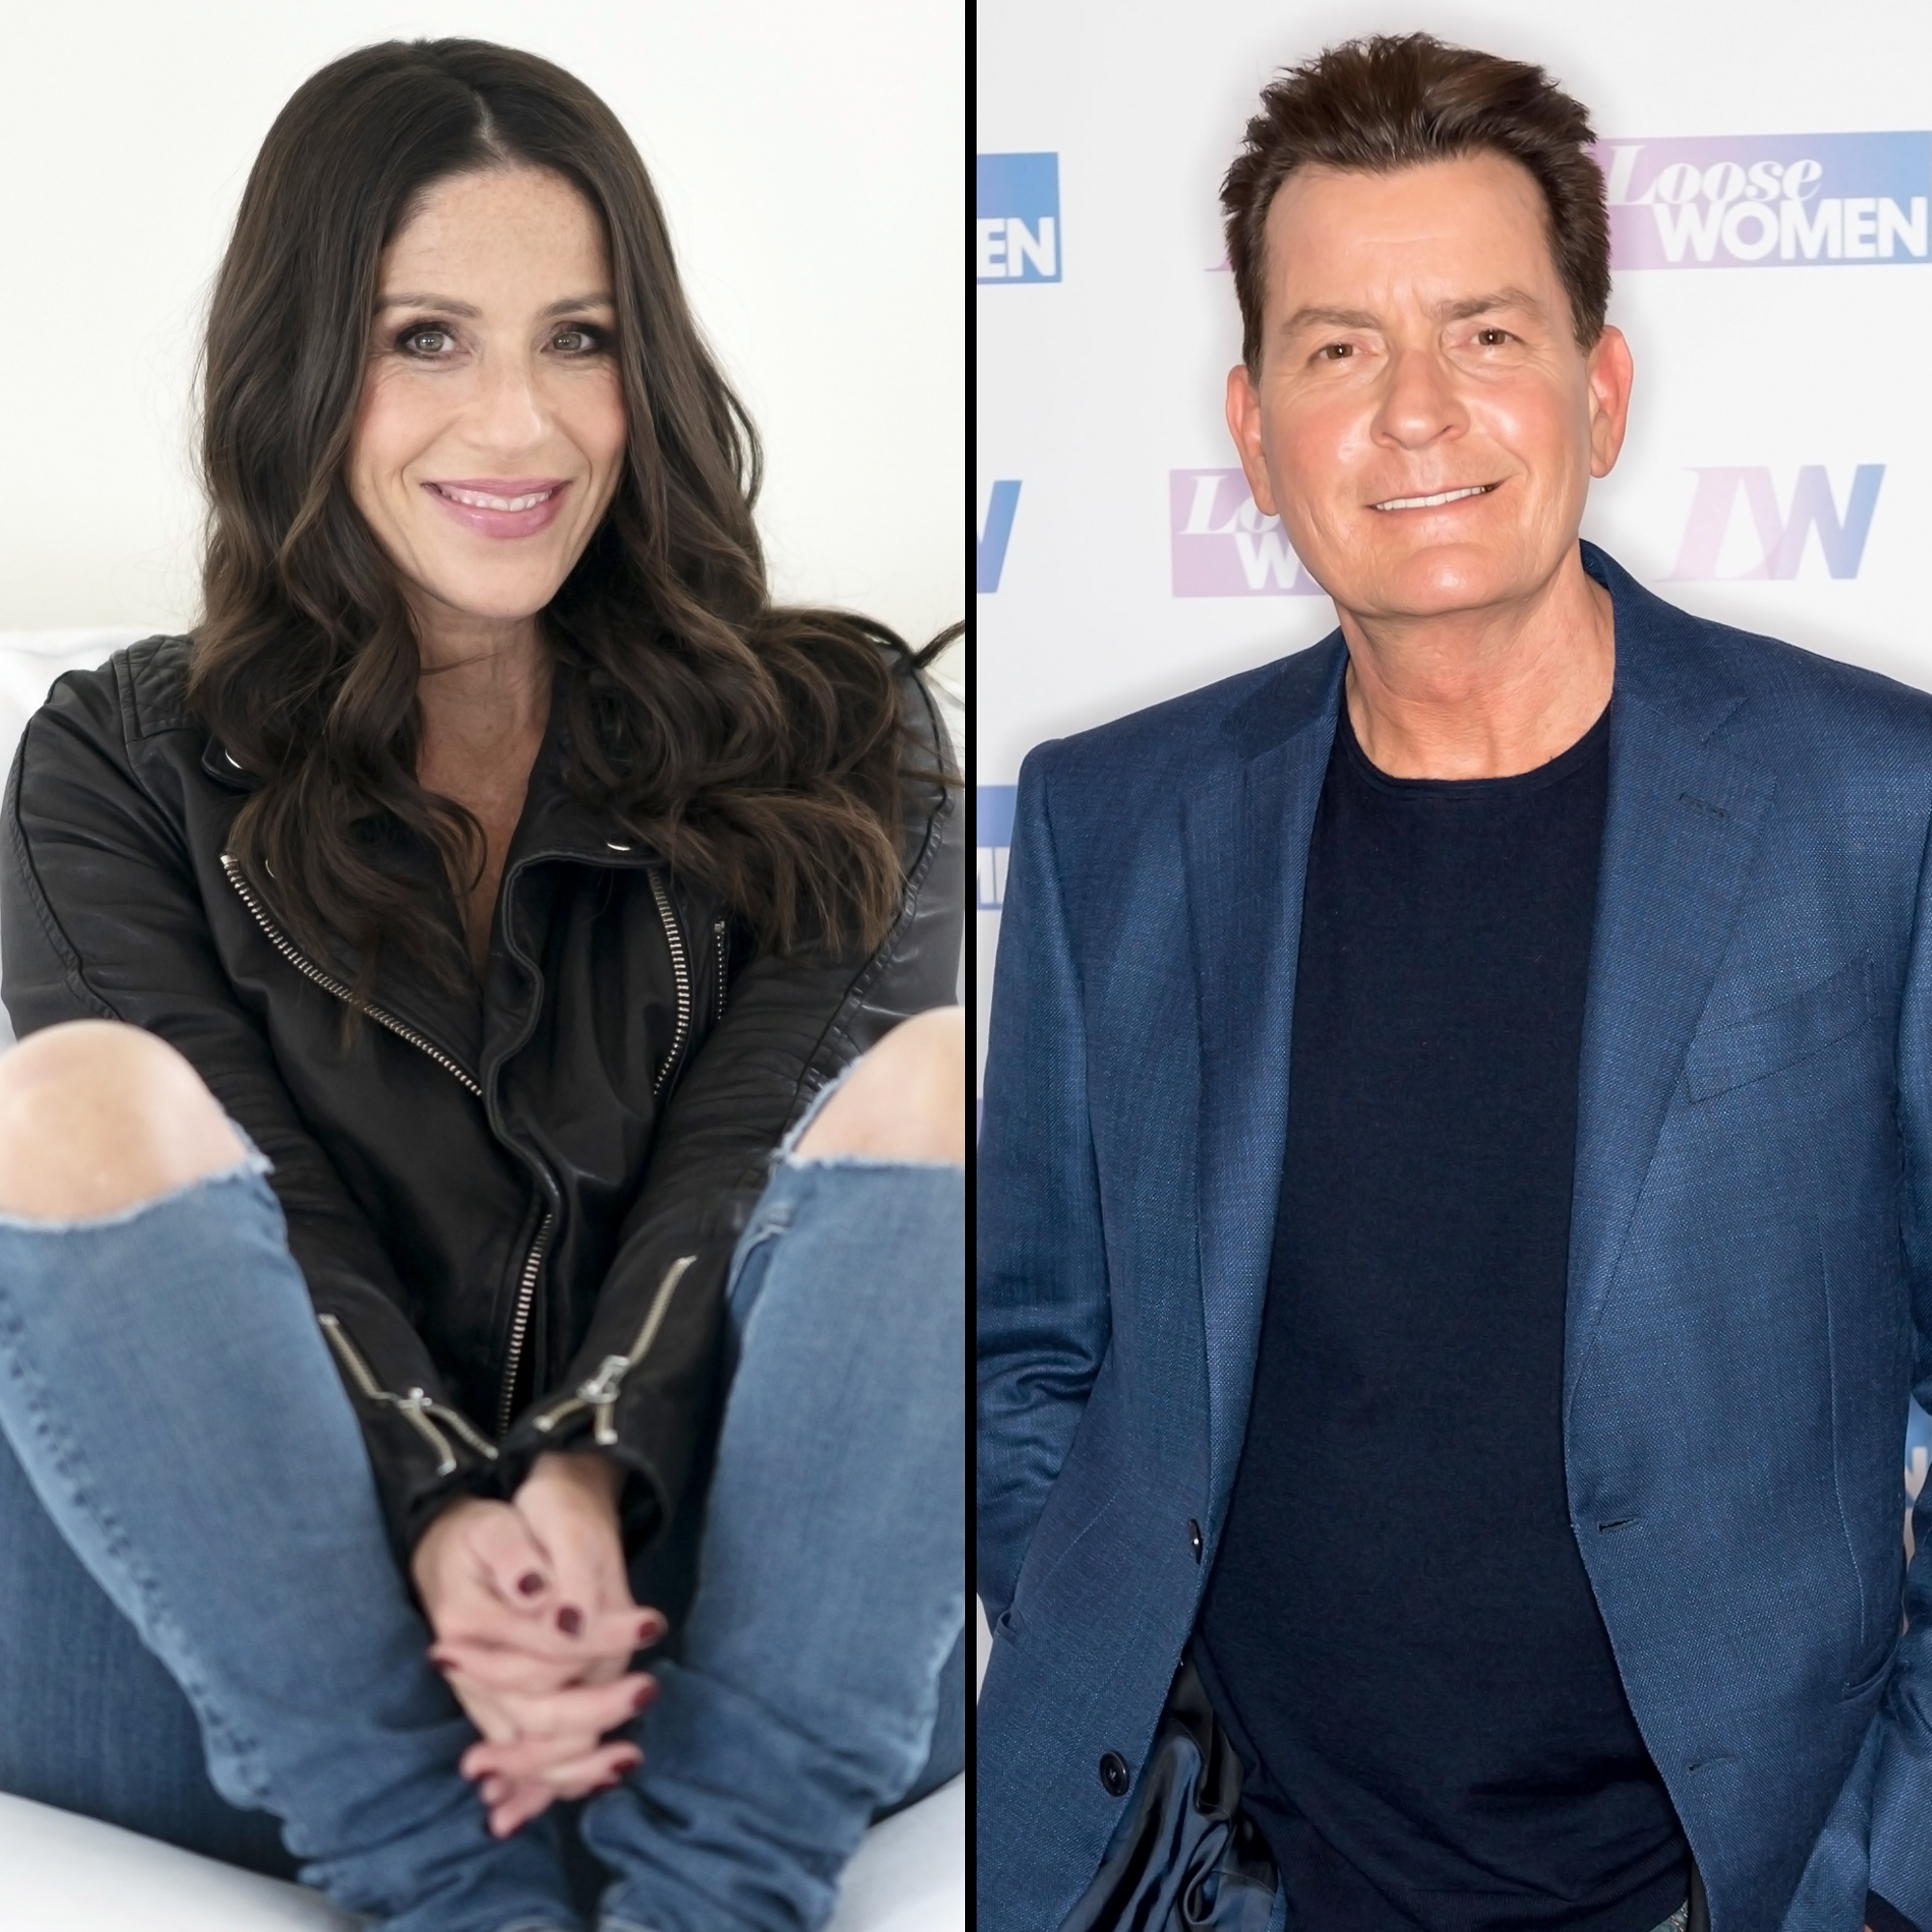 Soleil Moon Frye Gives Charlie Sheen Update After Documentary pic